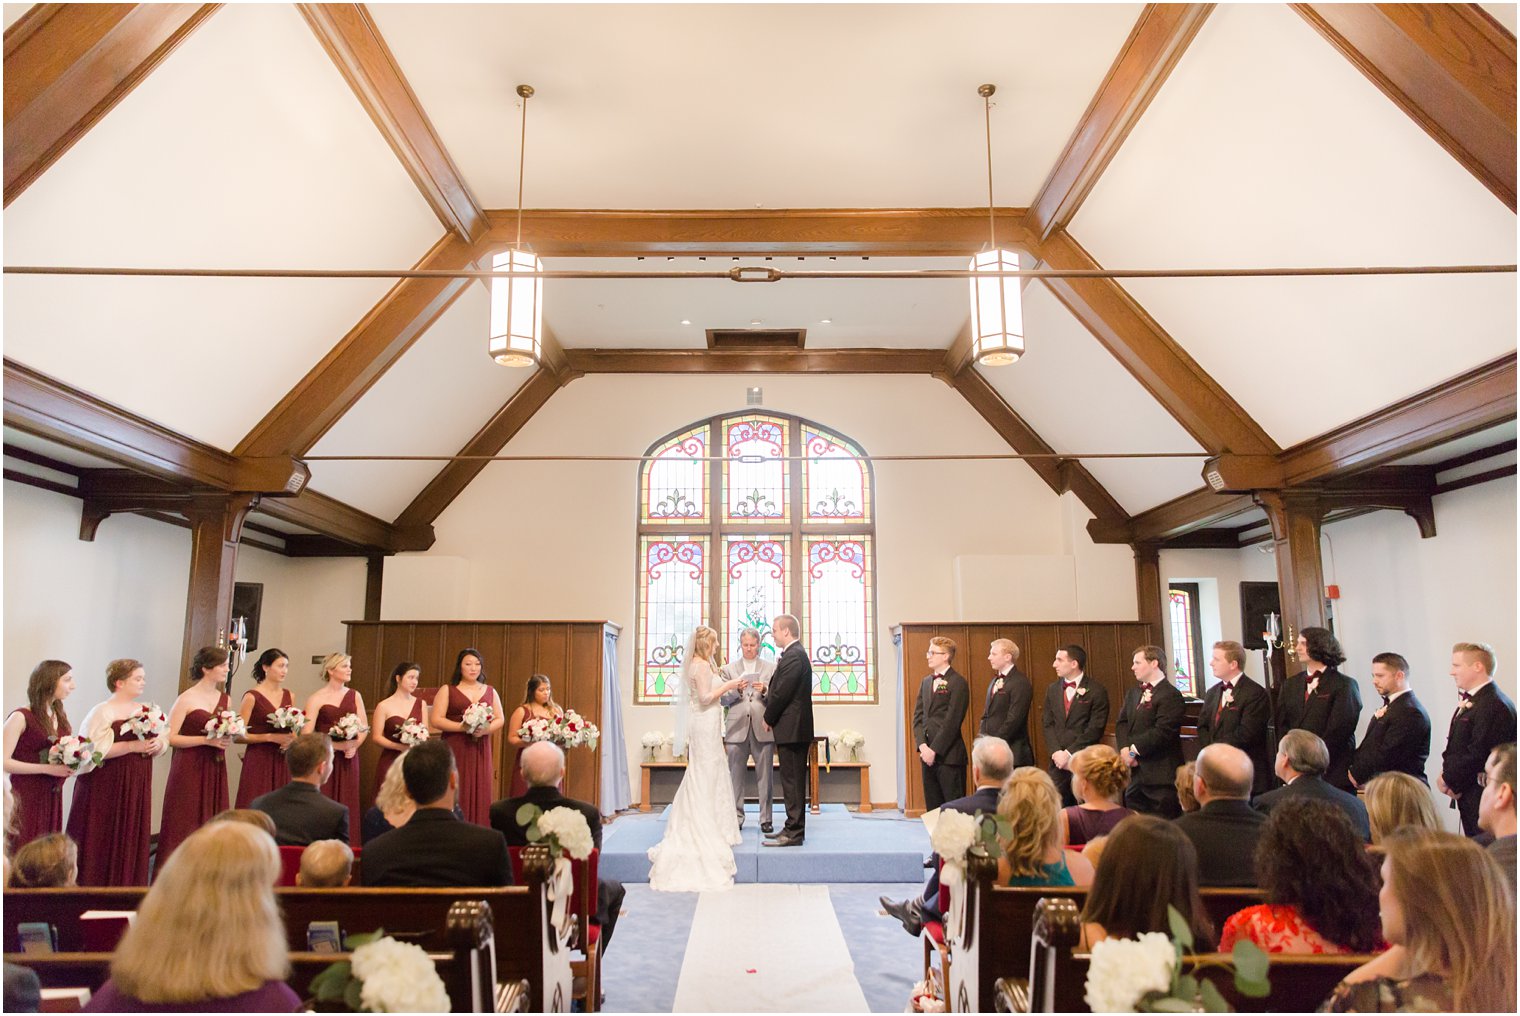 Exchanging rings at Hopewell Presbyterian Church Wedding Ceremony